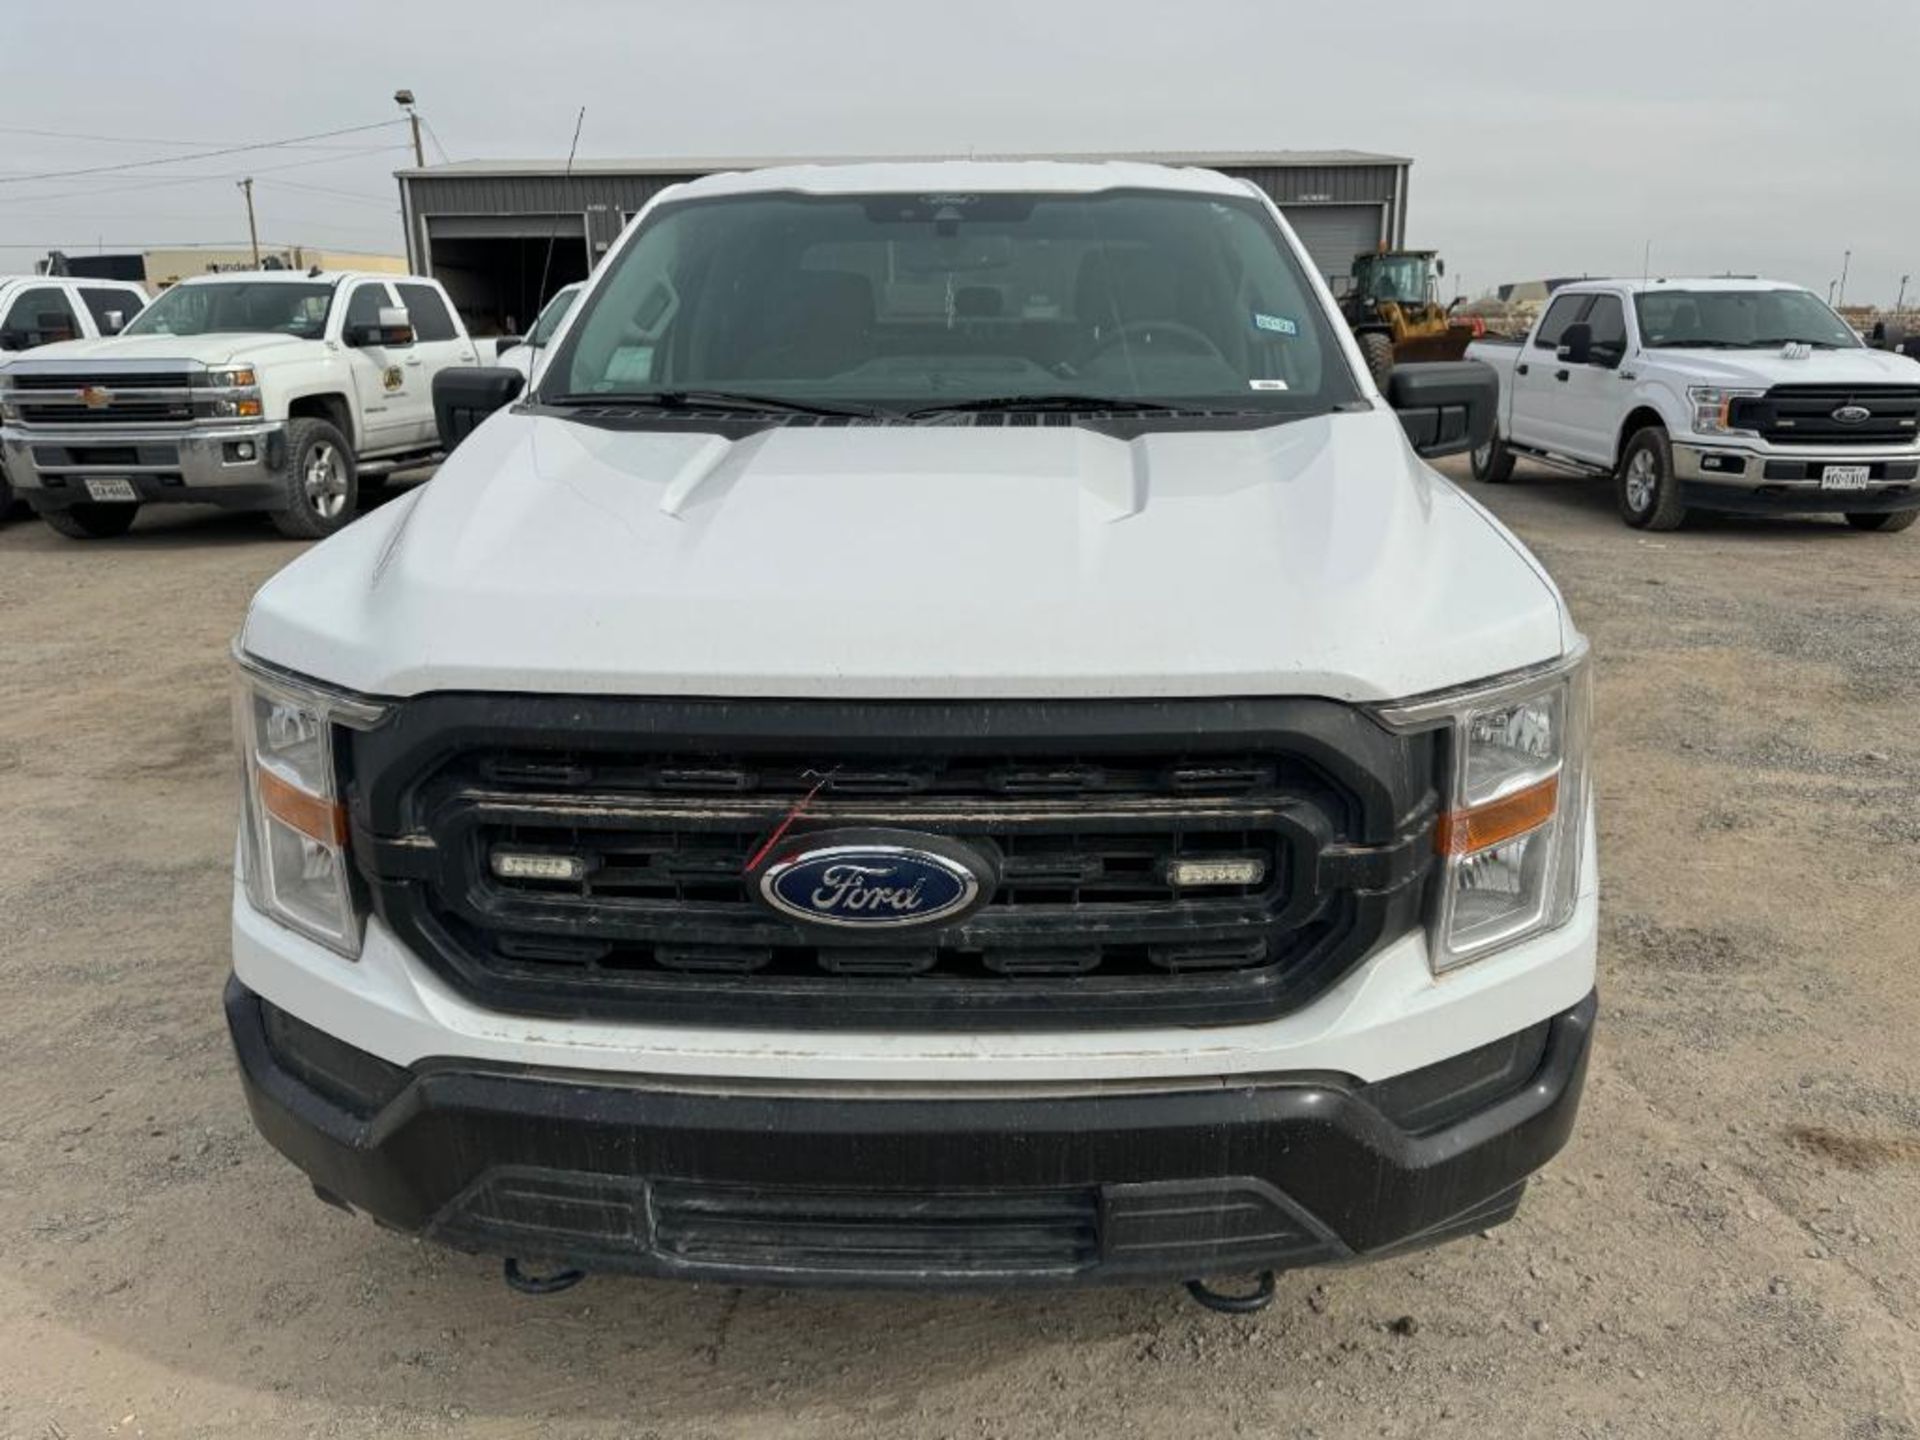 2021 Ford F150 XL Crew Cab 4X4 Truck - Image 6 of 19